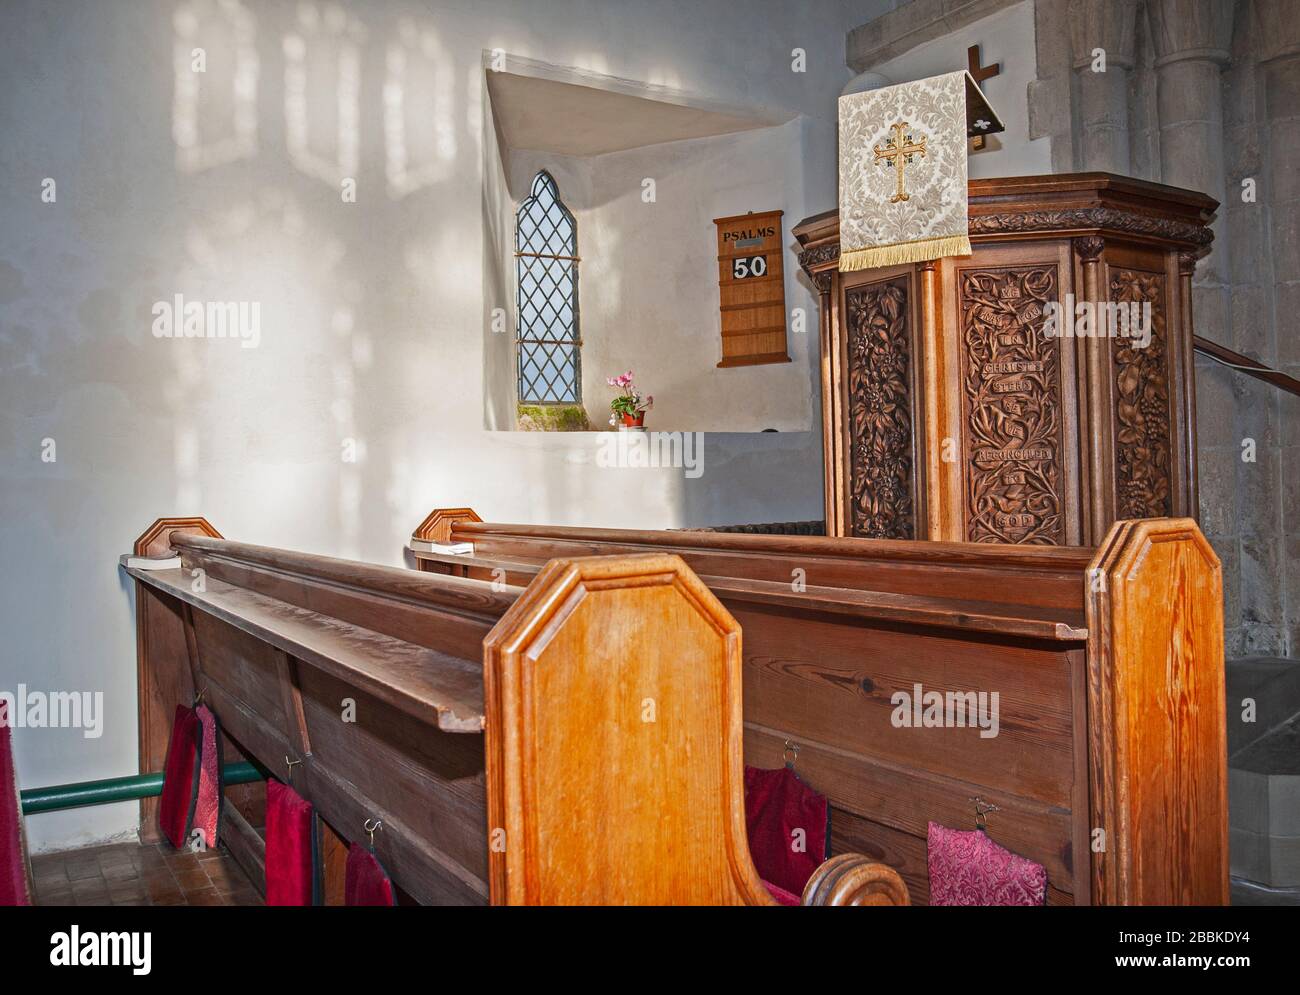 Interior of small medieval village church with pew seating and altar Stock Photo